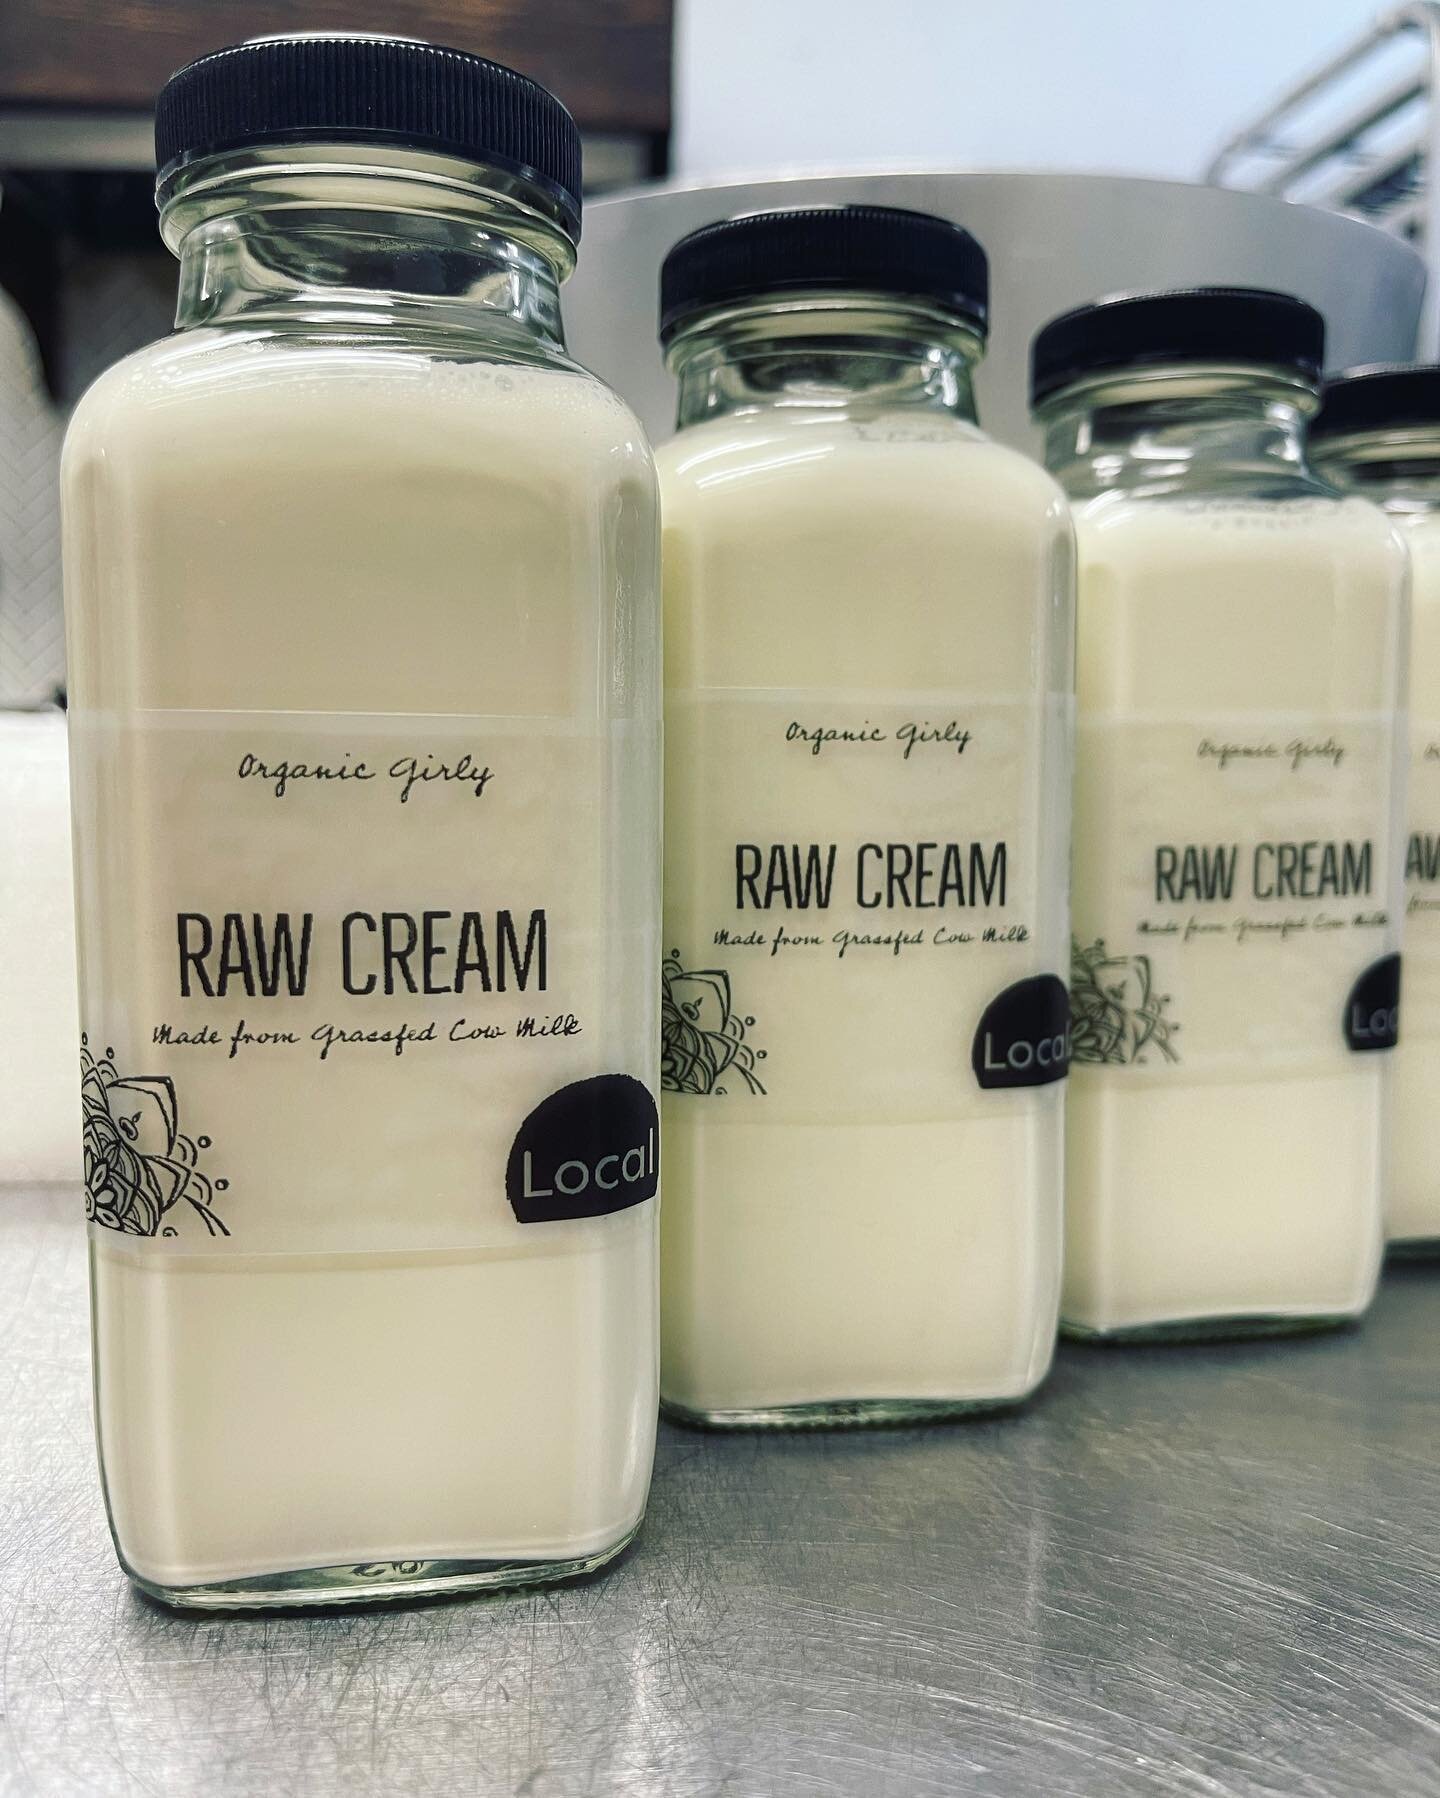 Raw Cream 🥳 Just pulled some for y&rsquo;all! 
We have raw cultured butter too! 

Always Organic, Grain &amp; Gluten Free. 

Organic Grain &amp; Gluten Free Bakery 
Immune System Support Caf&eacute; 
✊🏽Celiac Friendly 🤟🏽
🍏Low Carb, Vegan, &amp; 